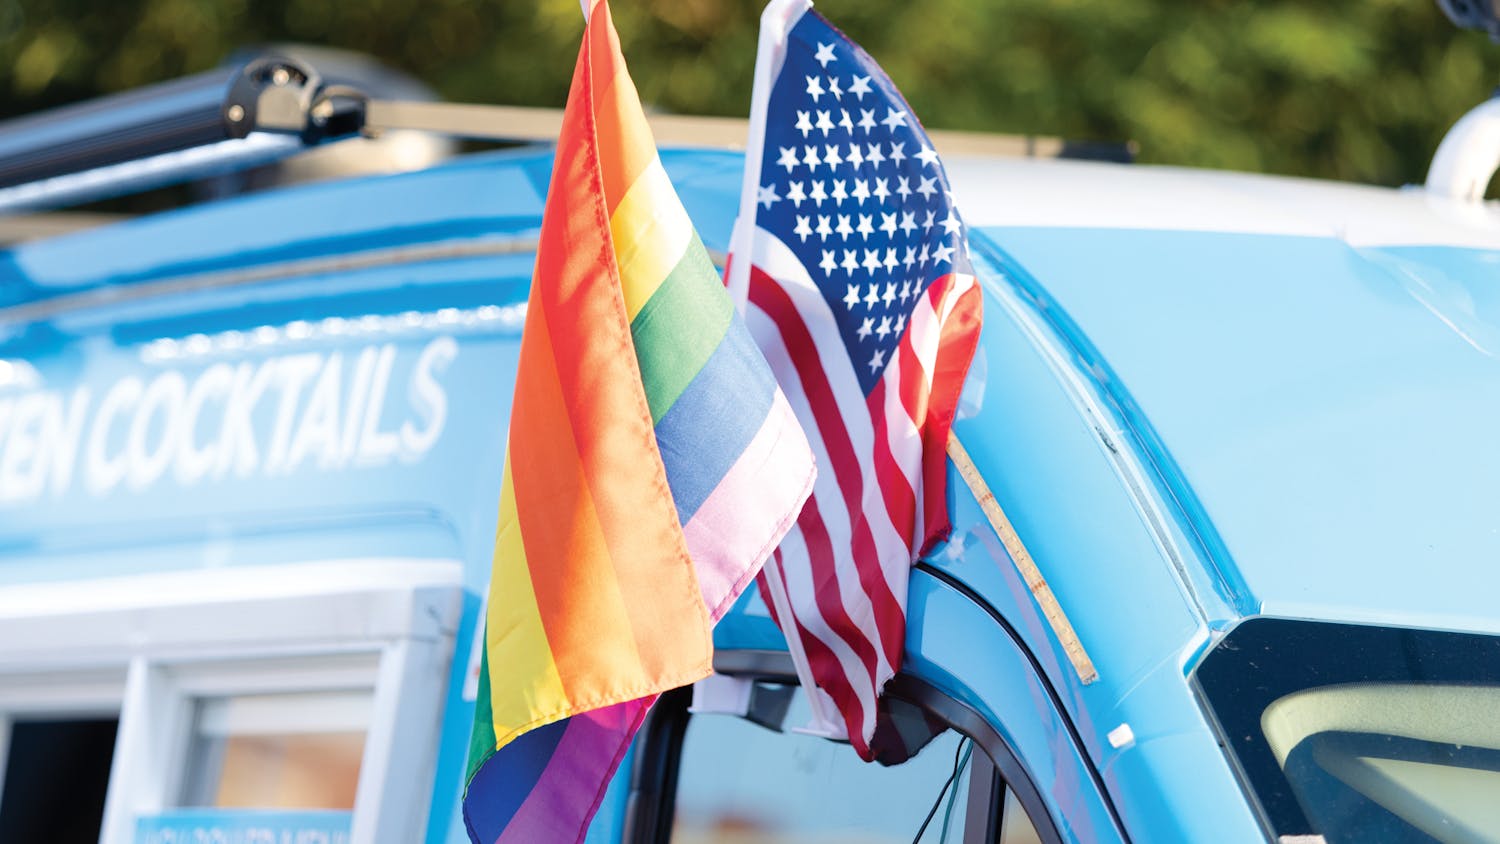 An LGBTQIA+ flag sits alongside a U.S. flag in a vendor’s truck window during the Outfest festival on June 4, 2022 on Park Street in Columbia, SC. Outfest featured performances, food and vendors in honor of Pride month.